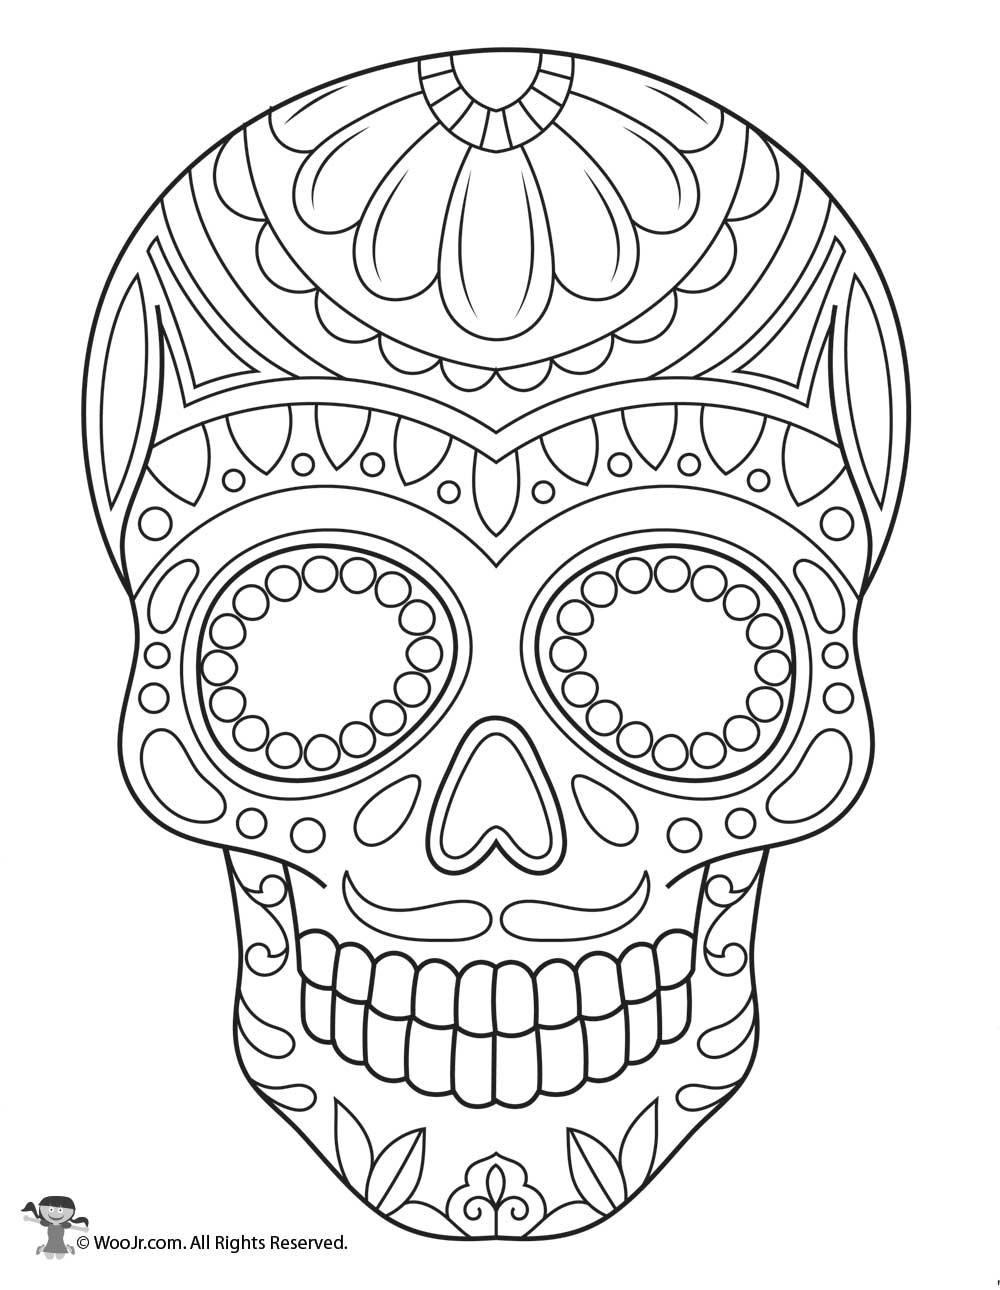 Skull Coloring Pages For Kids
 Sugar Skull Coloring Page